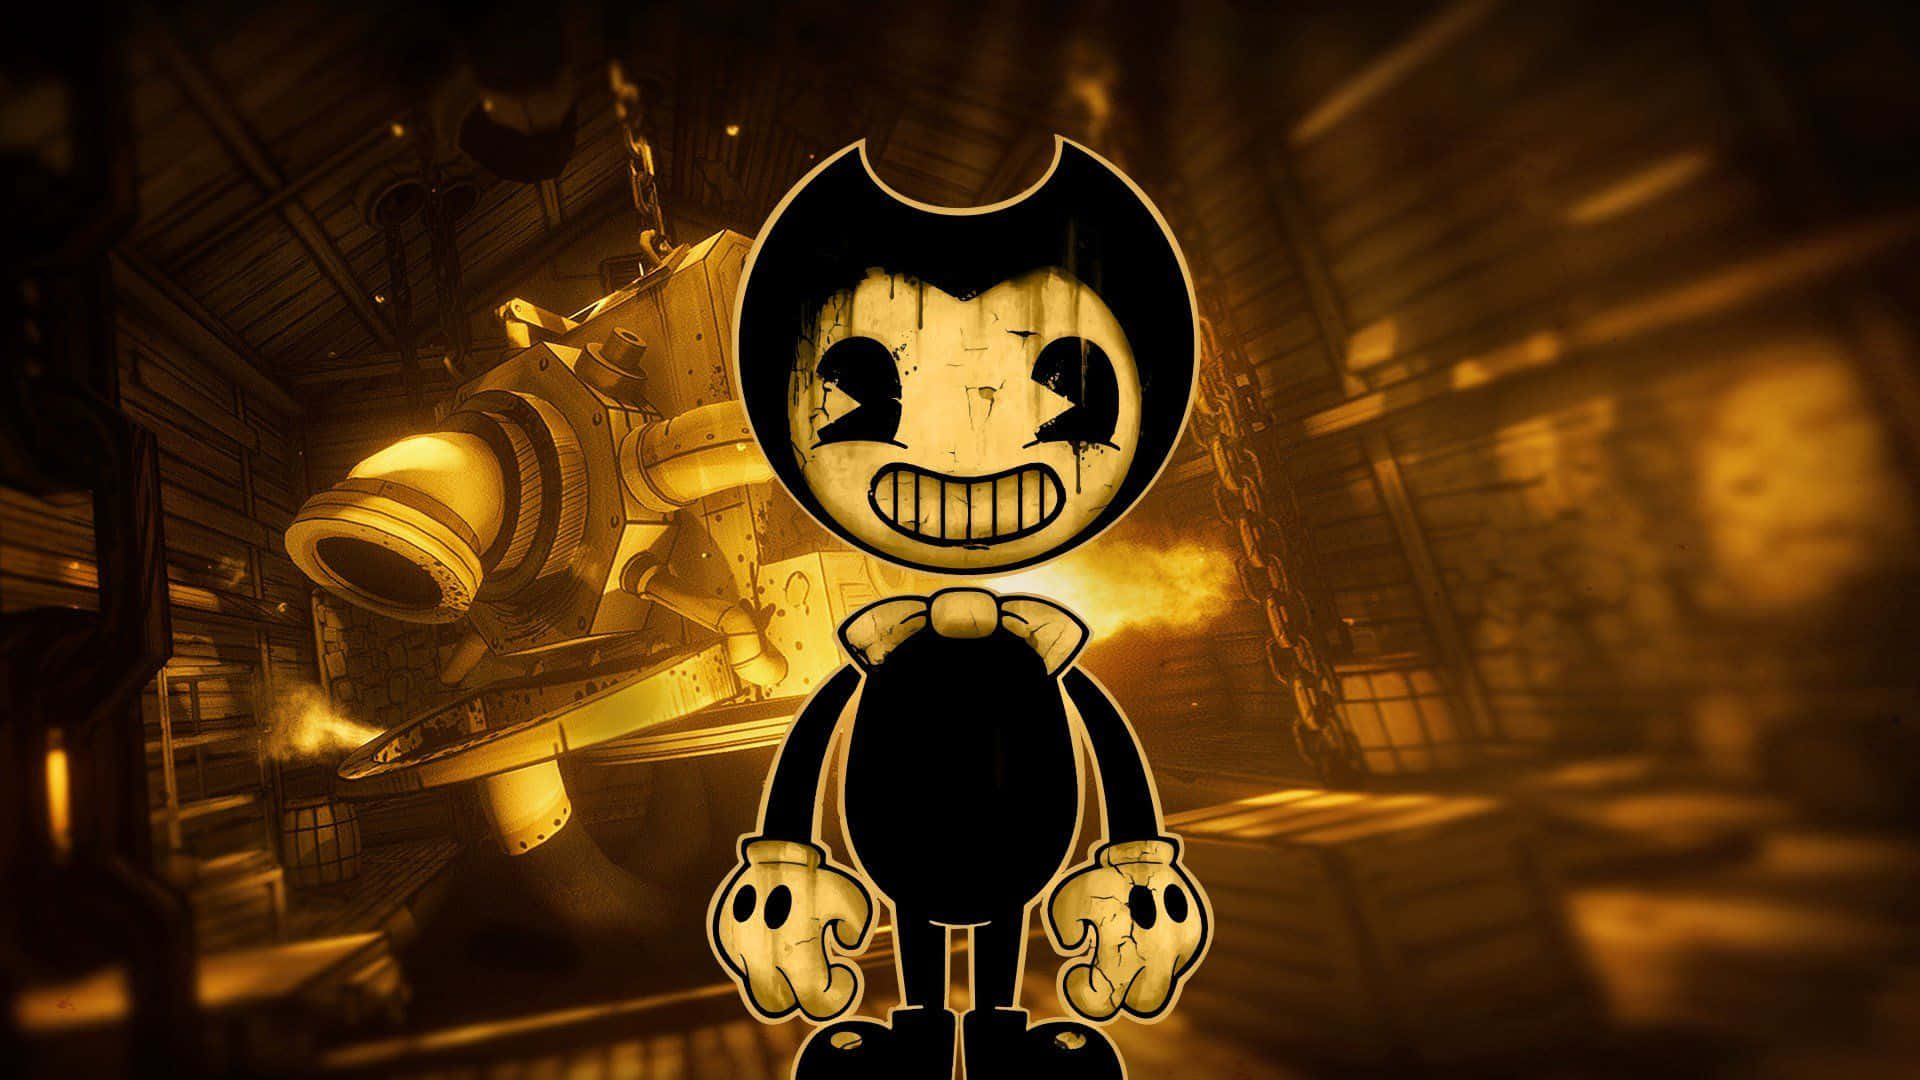 Download Explore the twisted world of Bendy and the Ink Machine